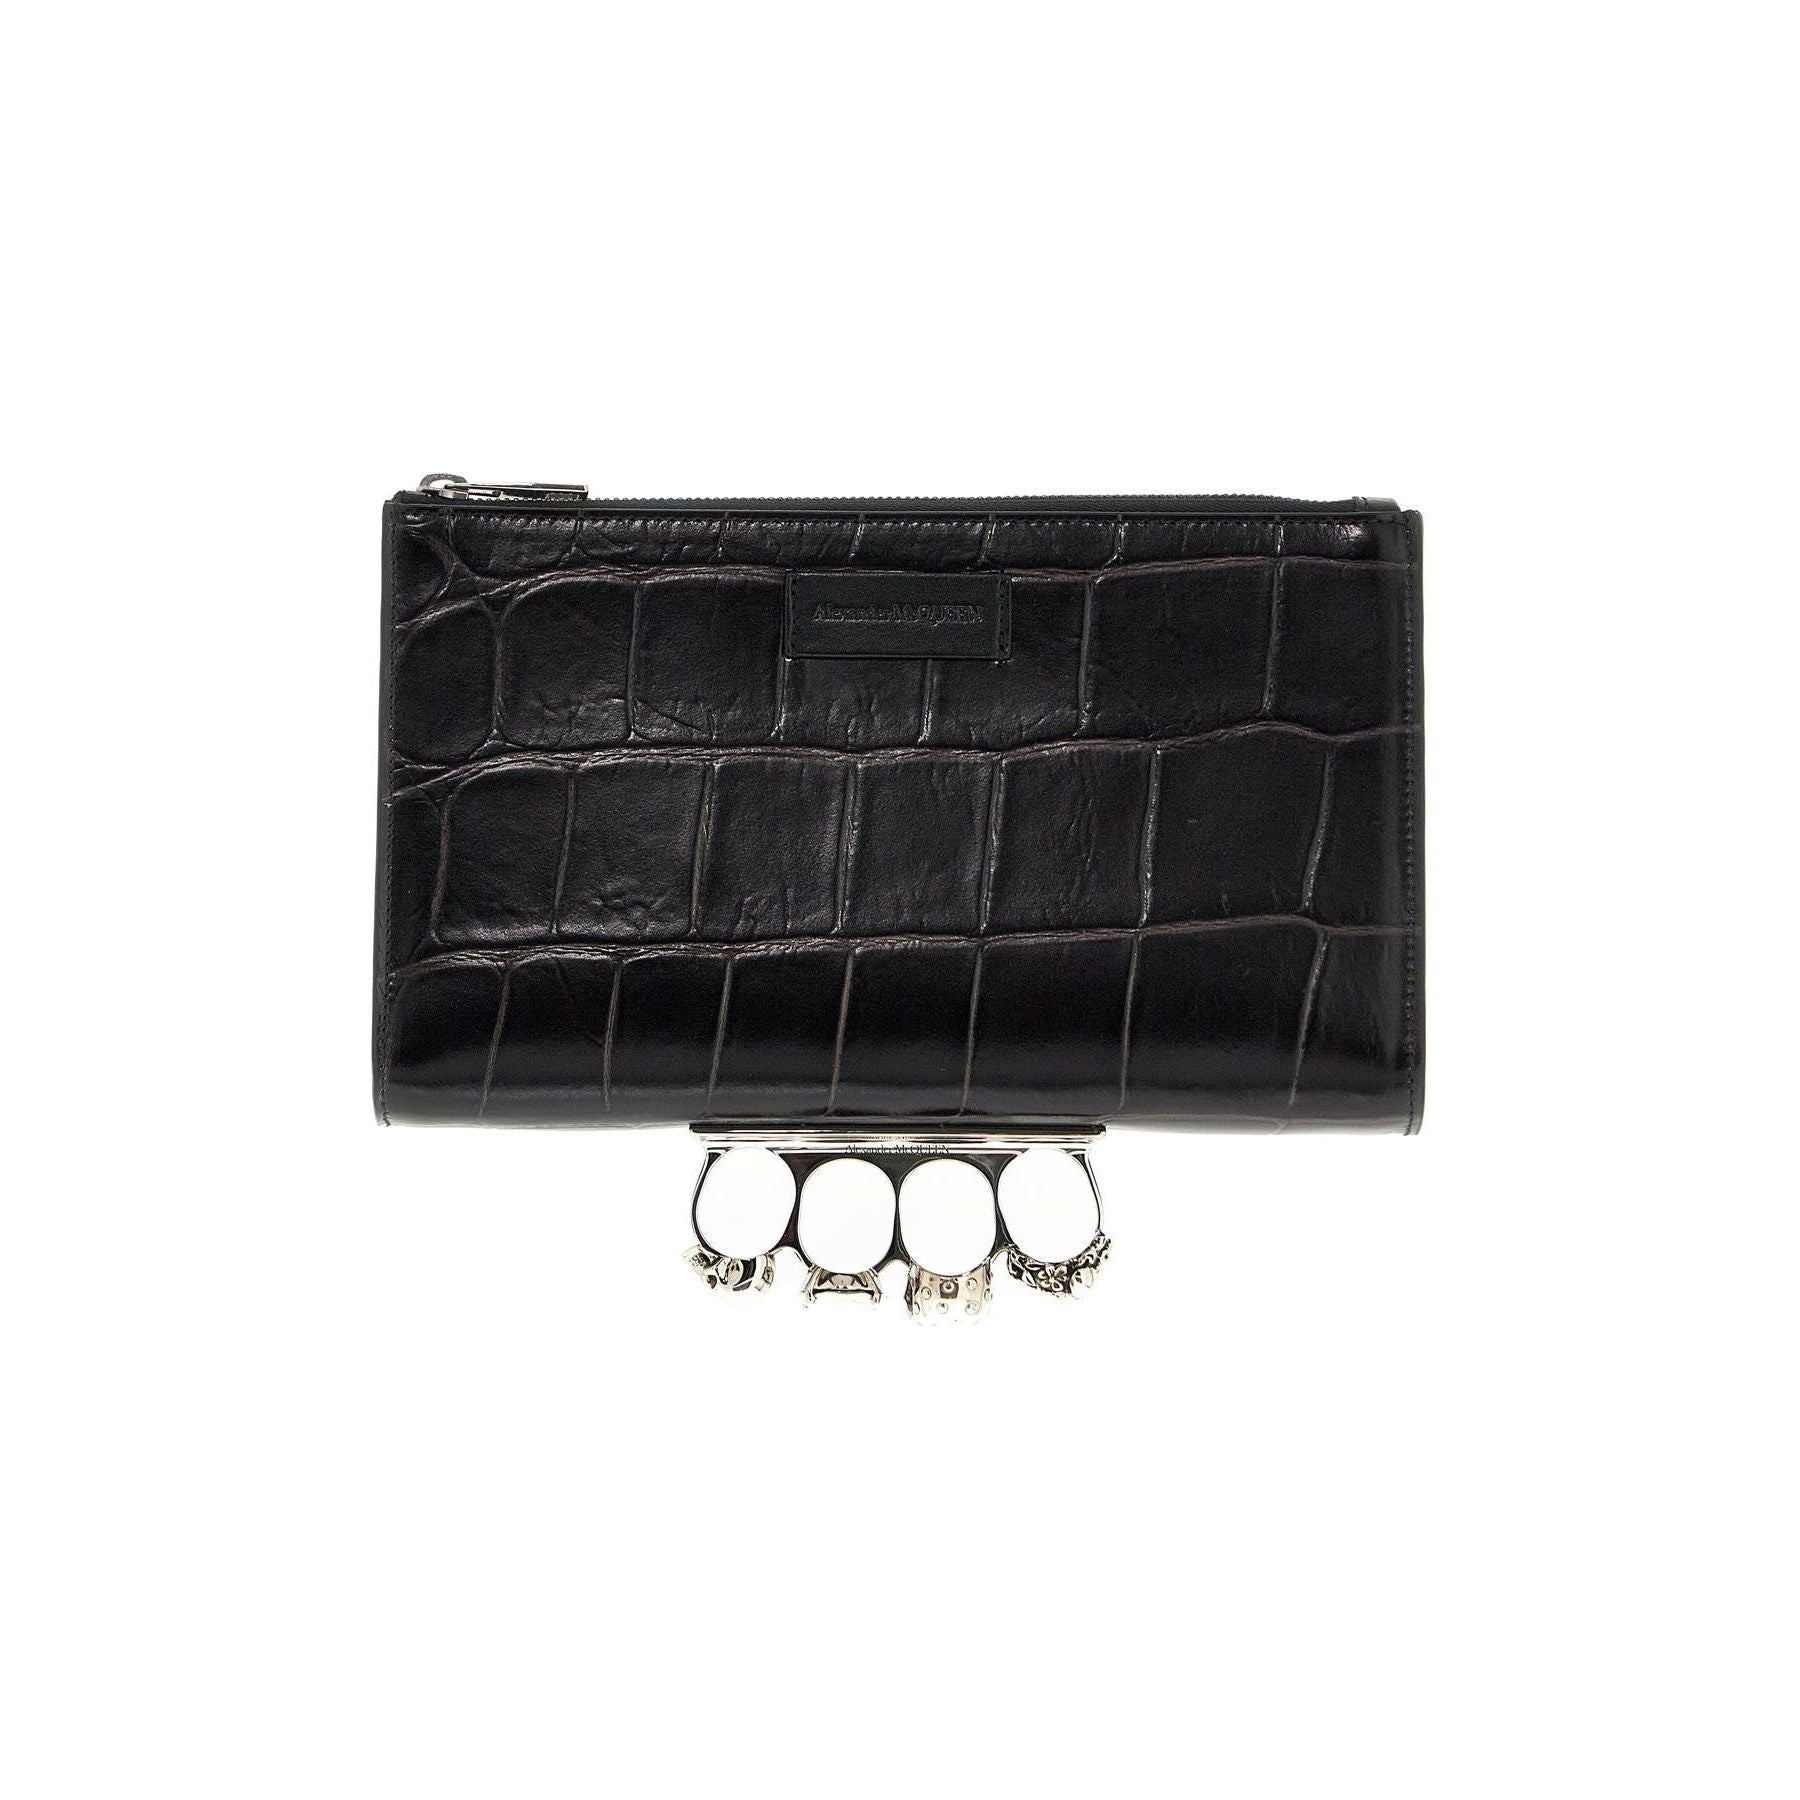 The Knuckle Small Croc Embossed Leather Zip Pouch